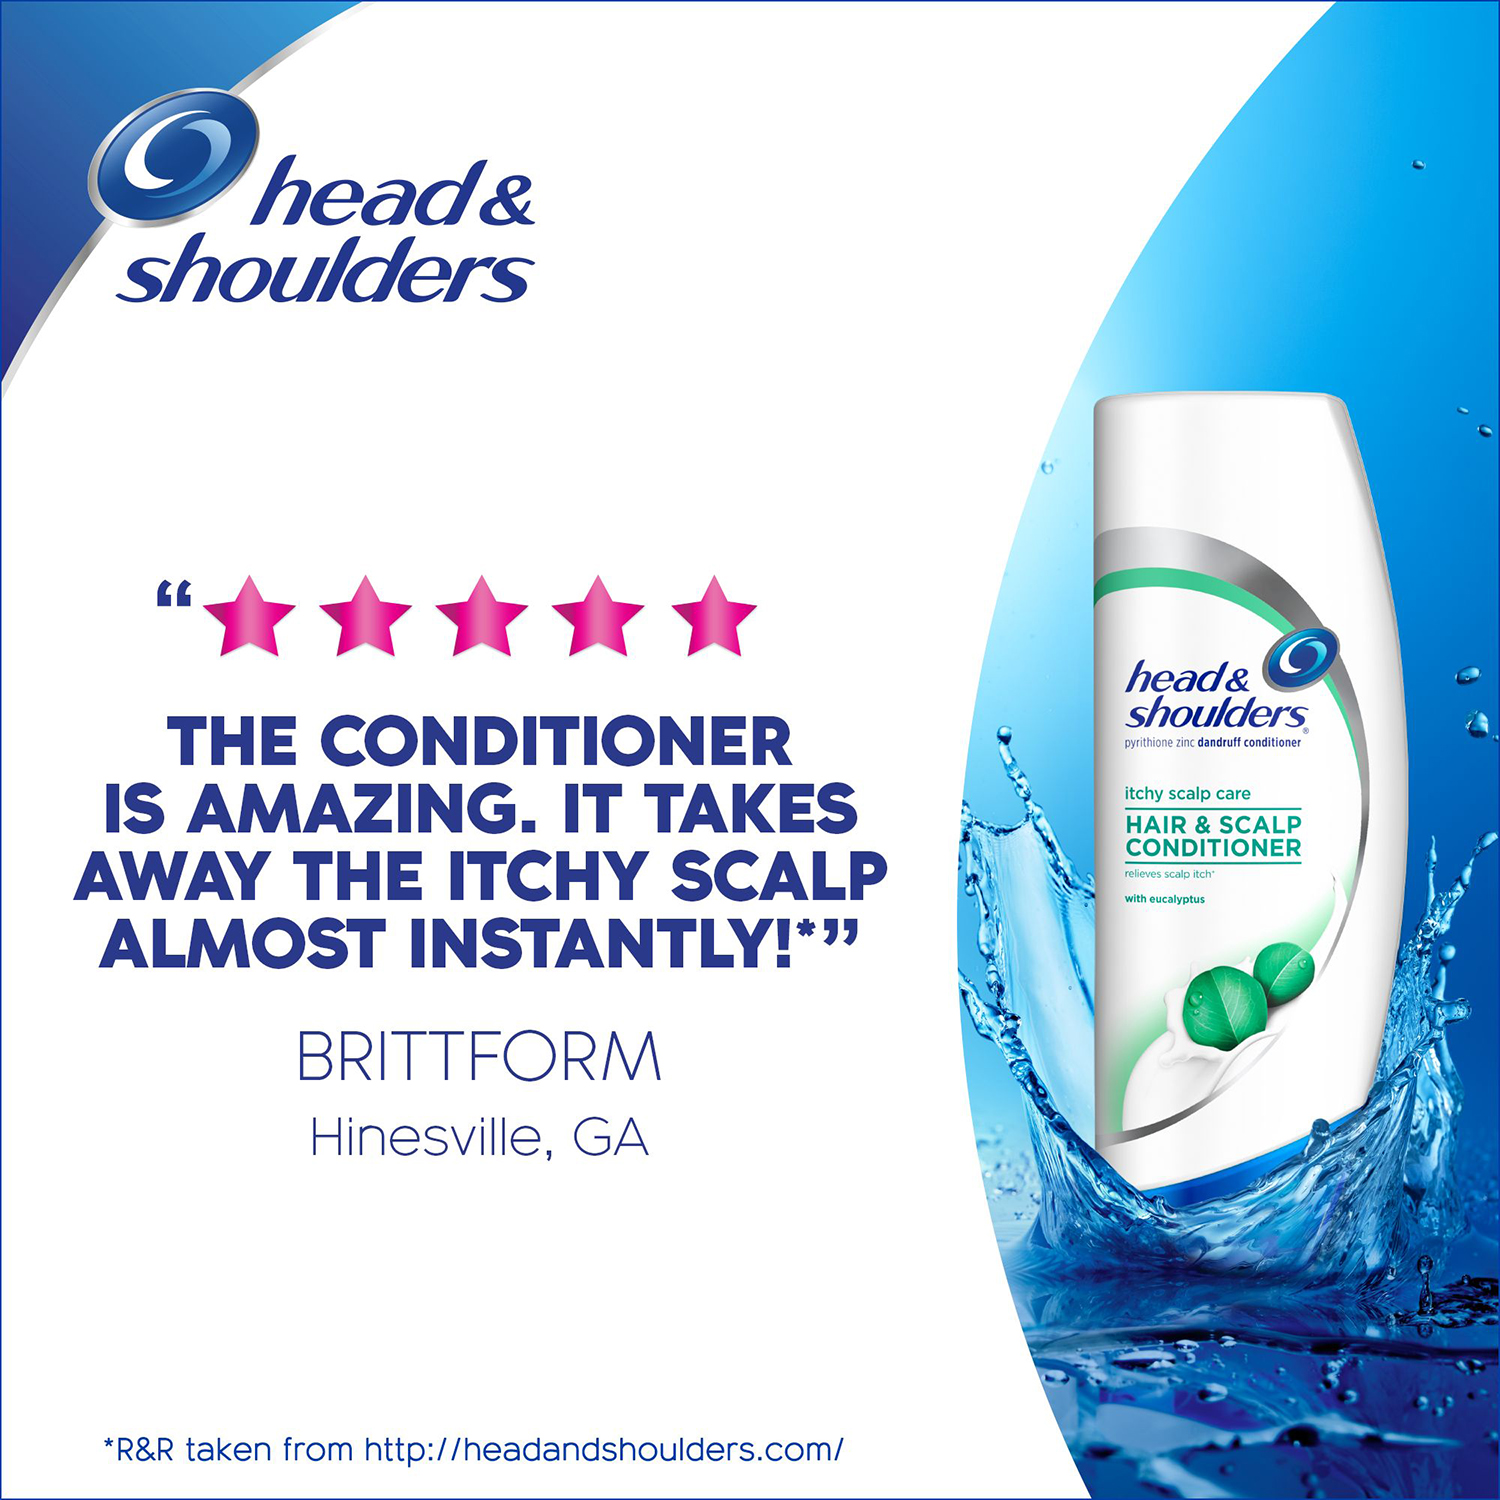 Head and Shoulders Itchy Scalp Care with Eucalyptus Conditioner 13.5 Fl Oz - image 5 of 8